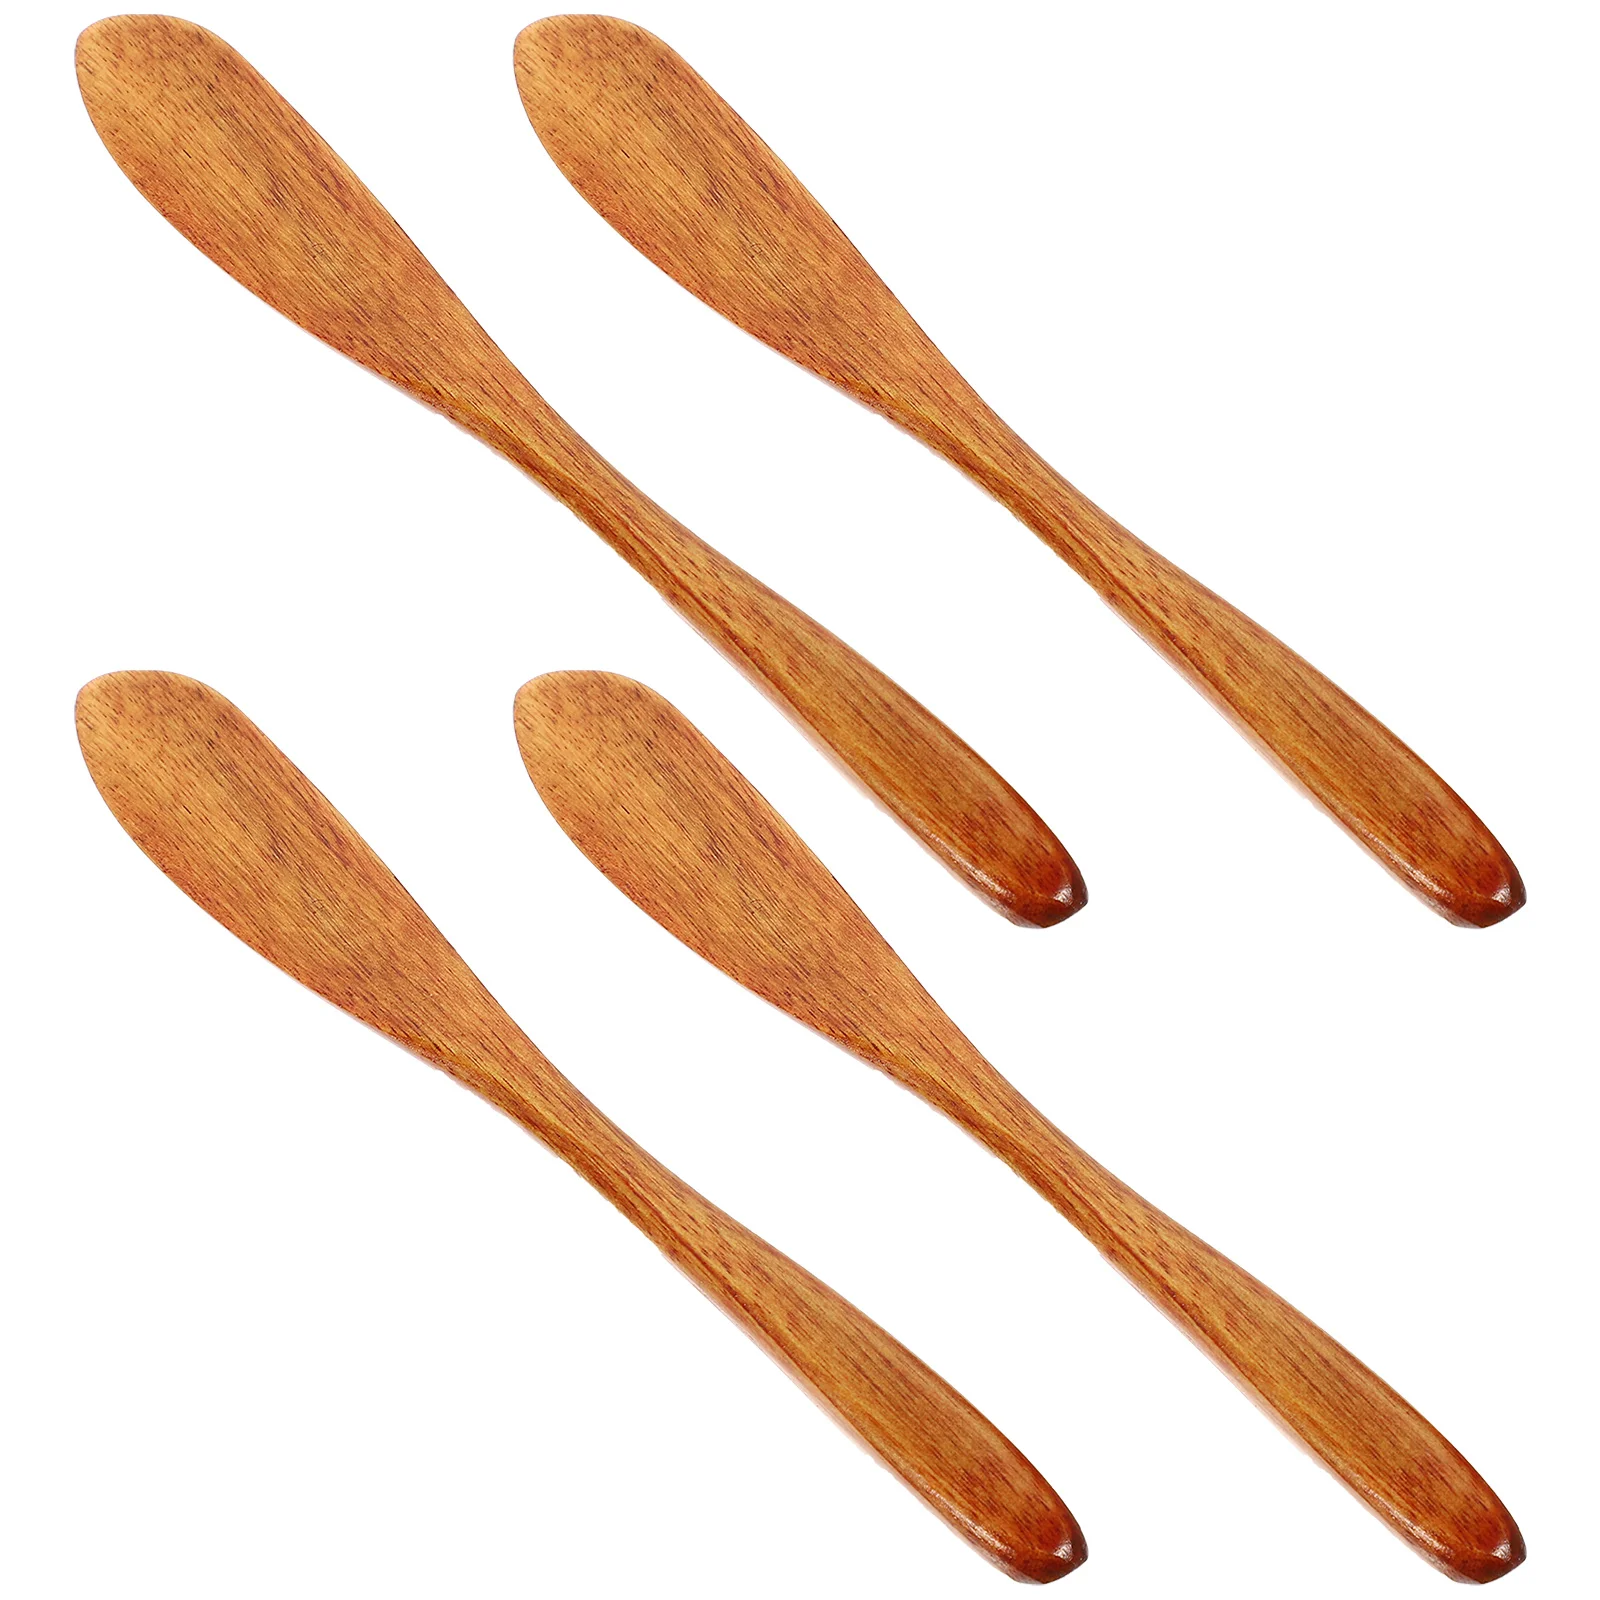 

4pcs Wood Knives Spatulas Kitchen Tool Bread Cake Jam Cheese Butter Spreader